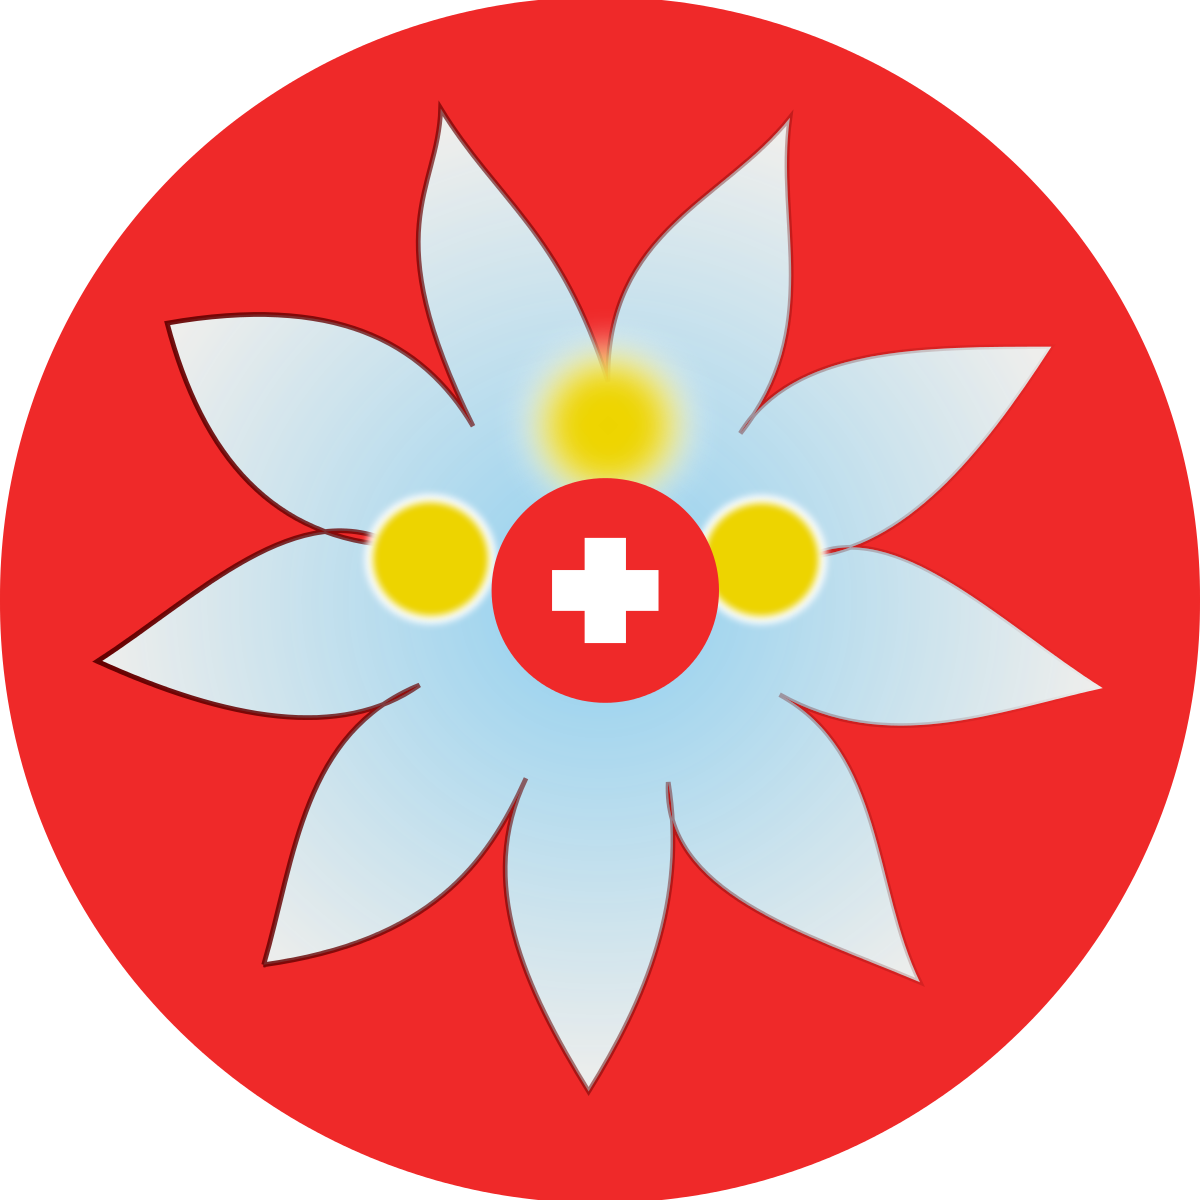 Images For Edelweiss Flower Clip Art - Food And Drug Administration (1200x1200)